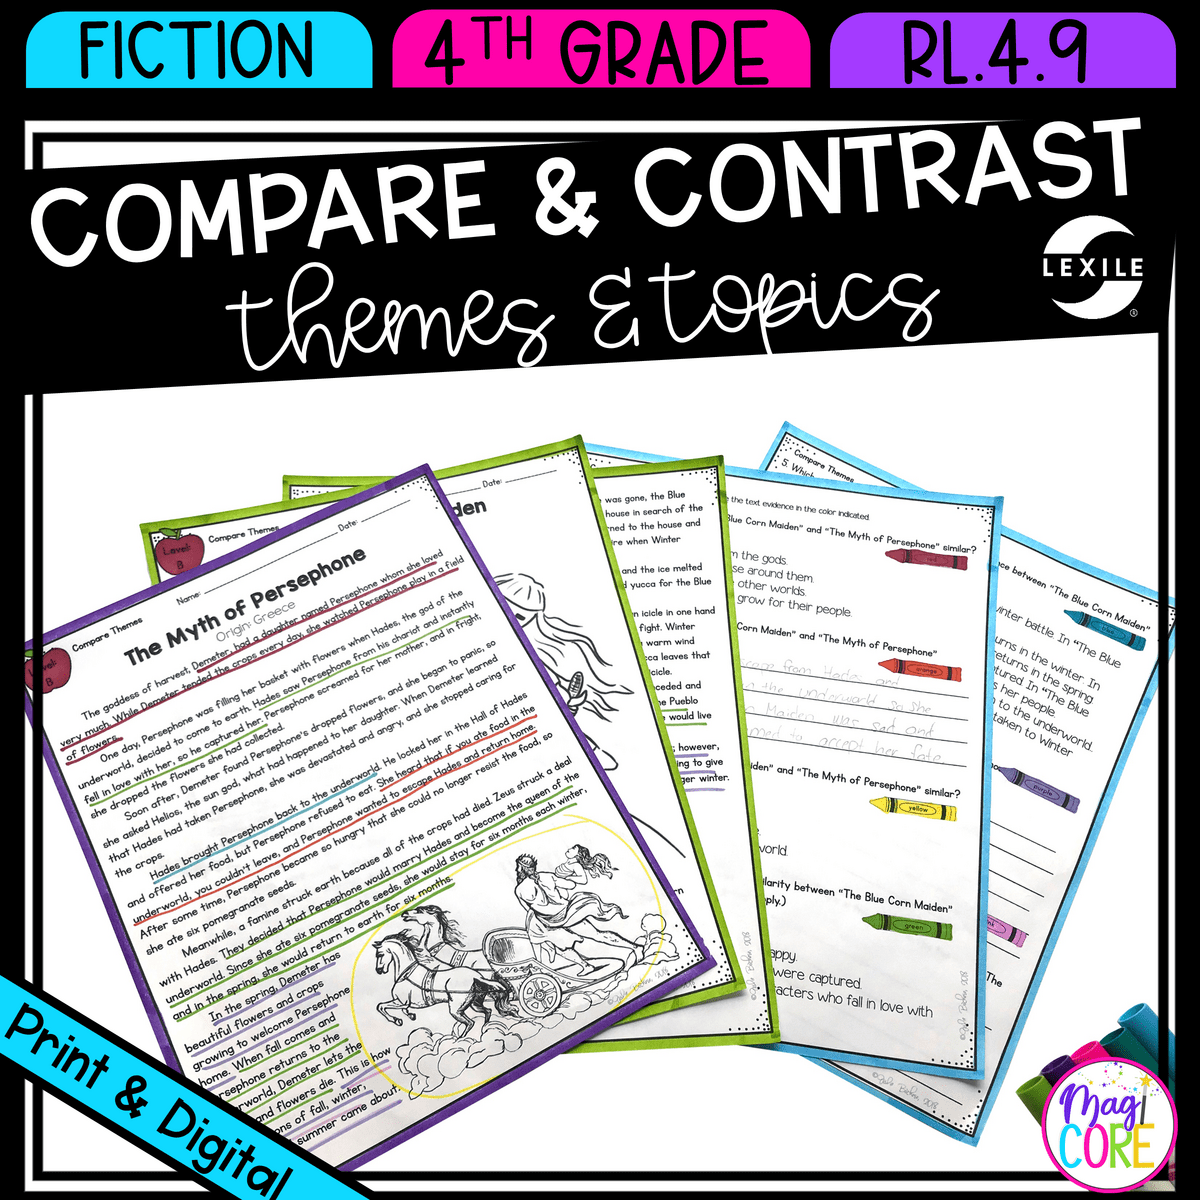 Compare & Contrast Themes Folktales & Myths RL.4.9 - Reading Passages for RL4.9